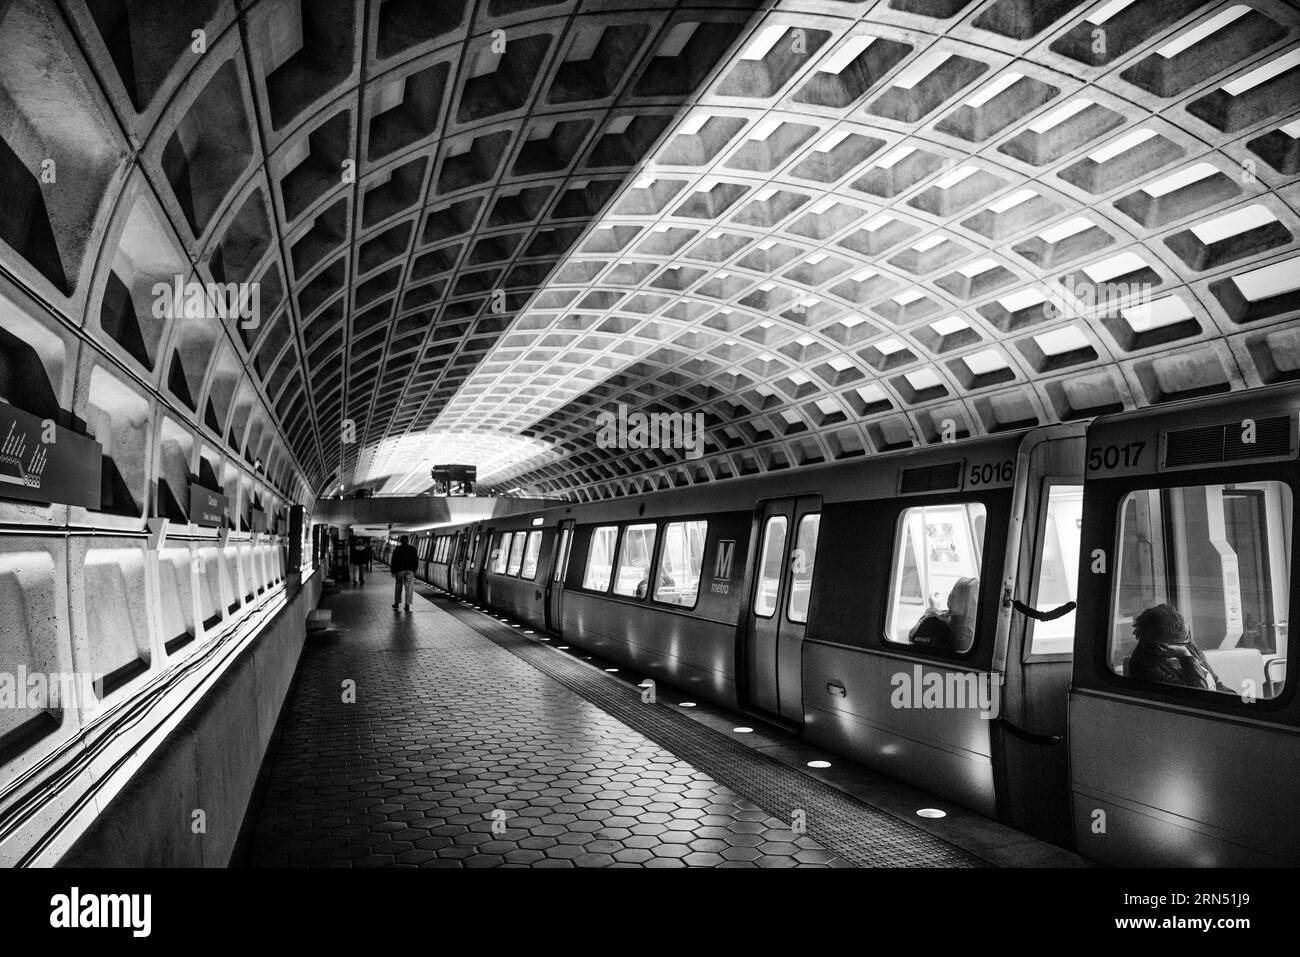 WASHINGTON DC, United States — A black and white photography of a Washington DC Metro station, representing one of the key transportation hubs that serve the nation's capital. The Metro system plays an essential role in the daily transit of thousands, connecting neighborhoods, business districts, and points of interest. Stock Photo